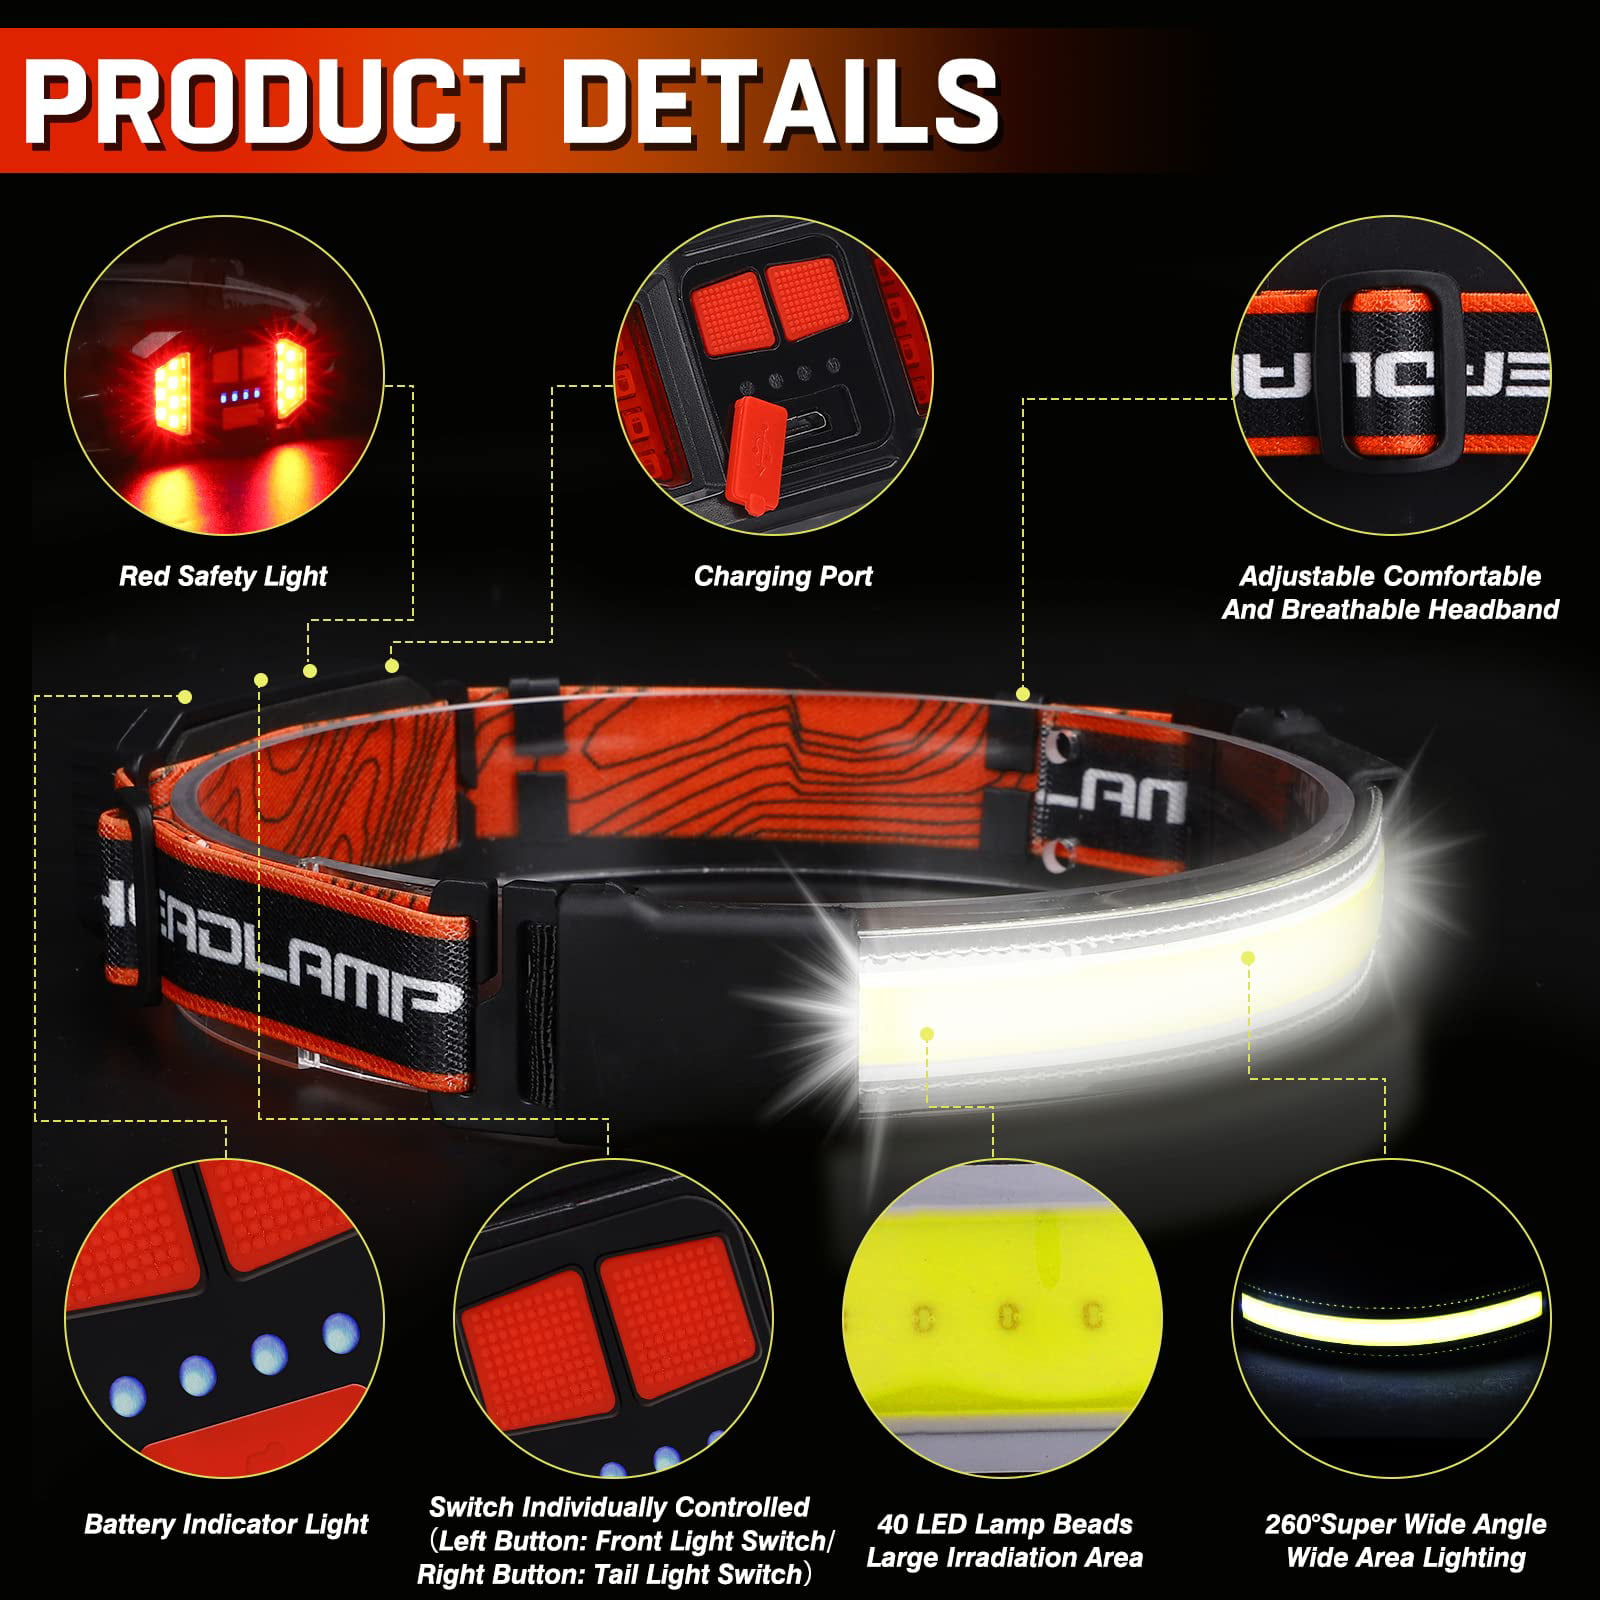 LED Headlamp Pack,Super Bright 1500Lumen Modes USB Rechargeable Headlamp  with Tail Red Light(Individual Control),Wide Beam Illumination Waterproof  Headlamp for Outdoor Running Hunting Camping Gear